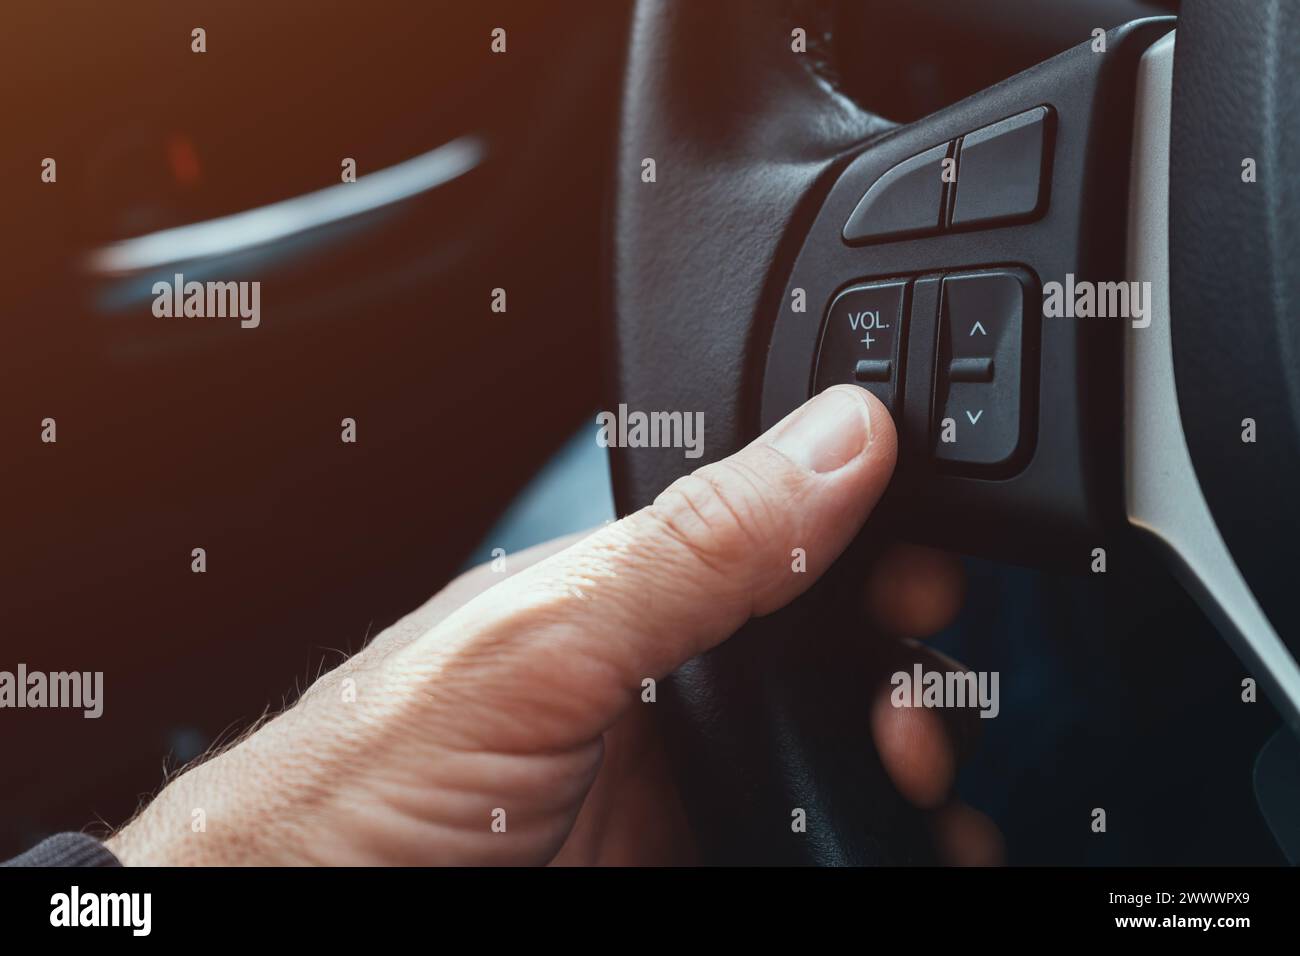 Driver pushing volume down button on car steering wheel, selective focus Stock Photo